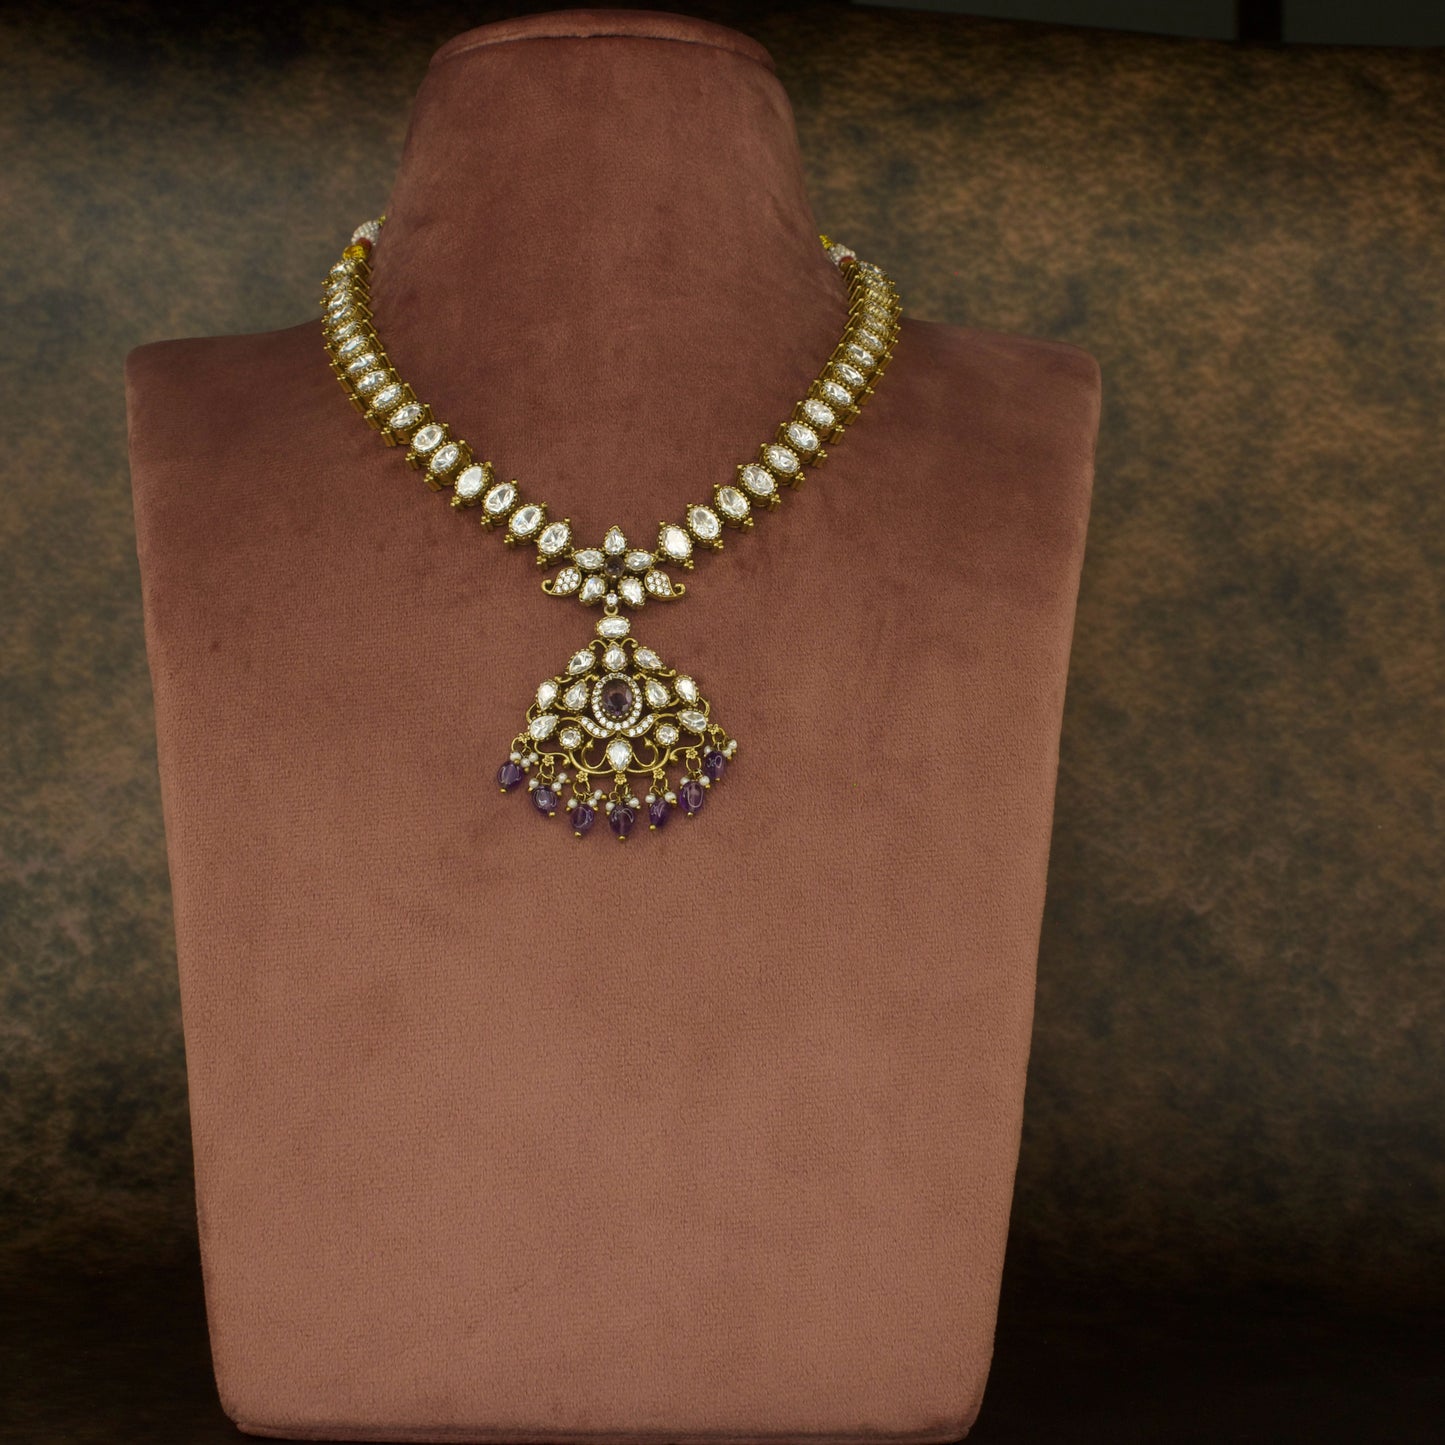 Single Layer Polki Victorian Necklace Set with High Quality Victorian Finish. This product belongs to Victorian Jewellery category